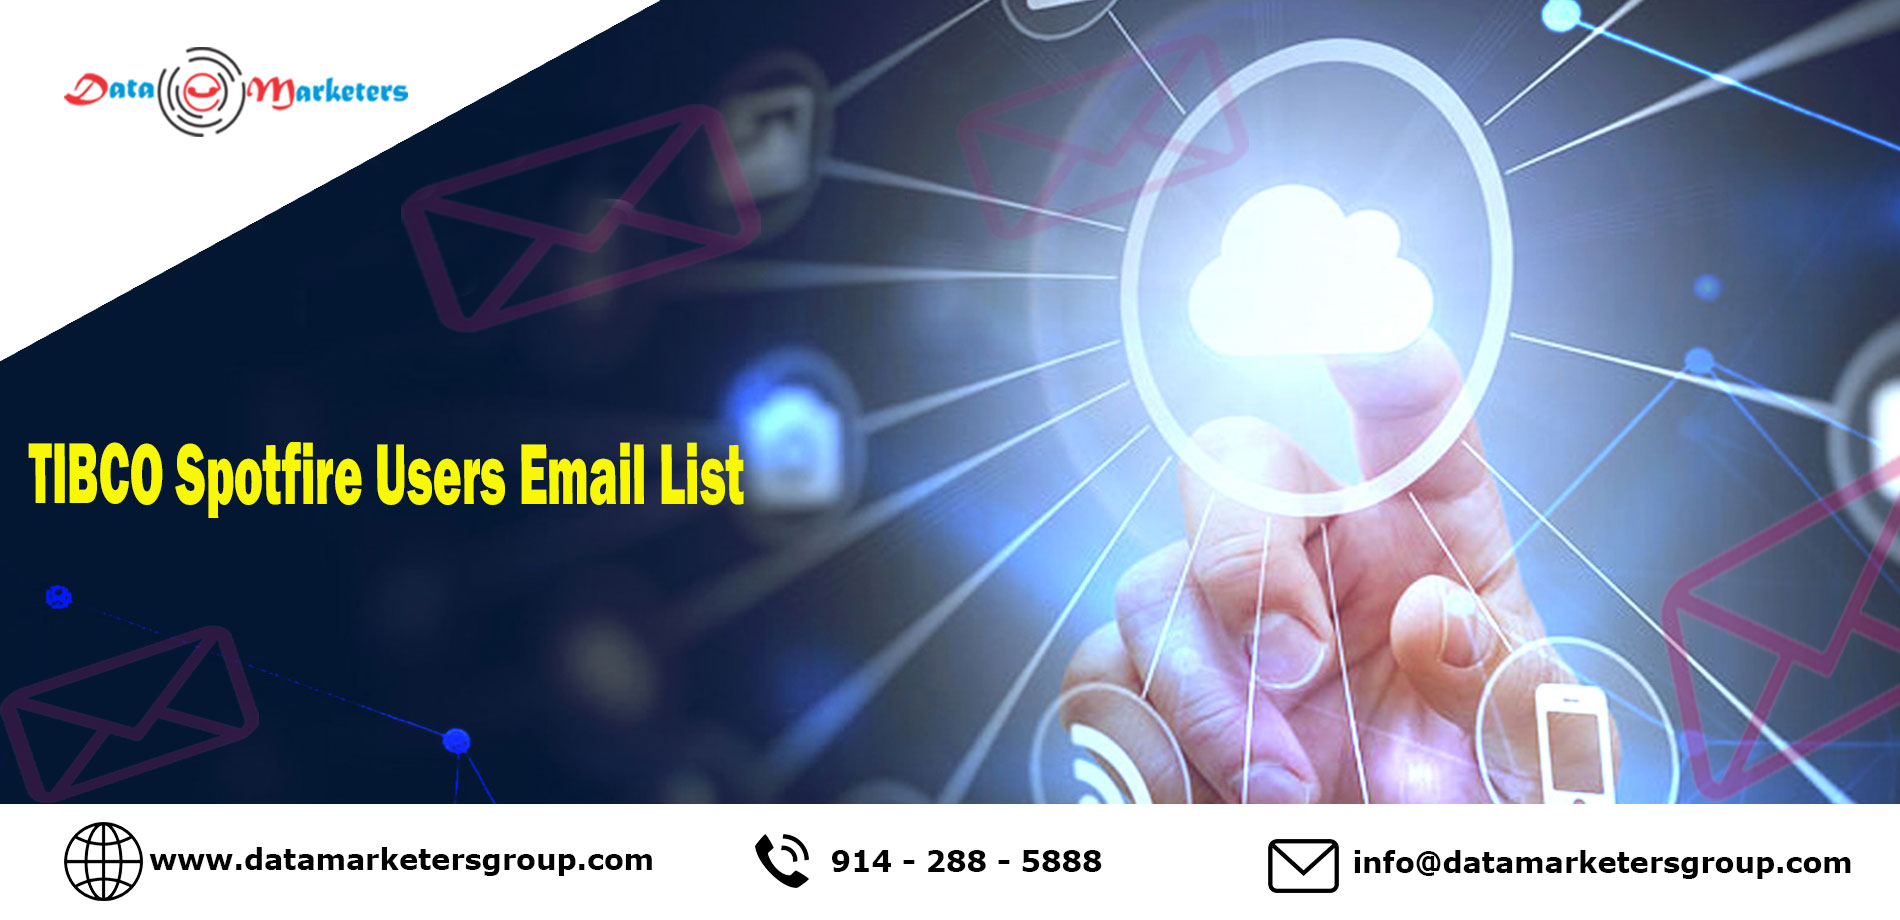 TIBCO Spotfire Users Email List | Data Marketers Group